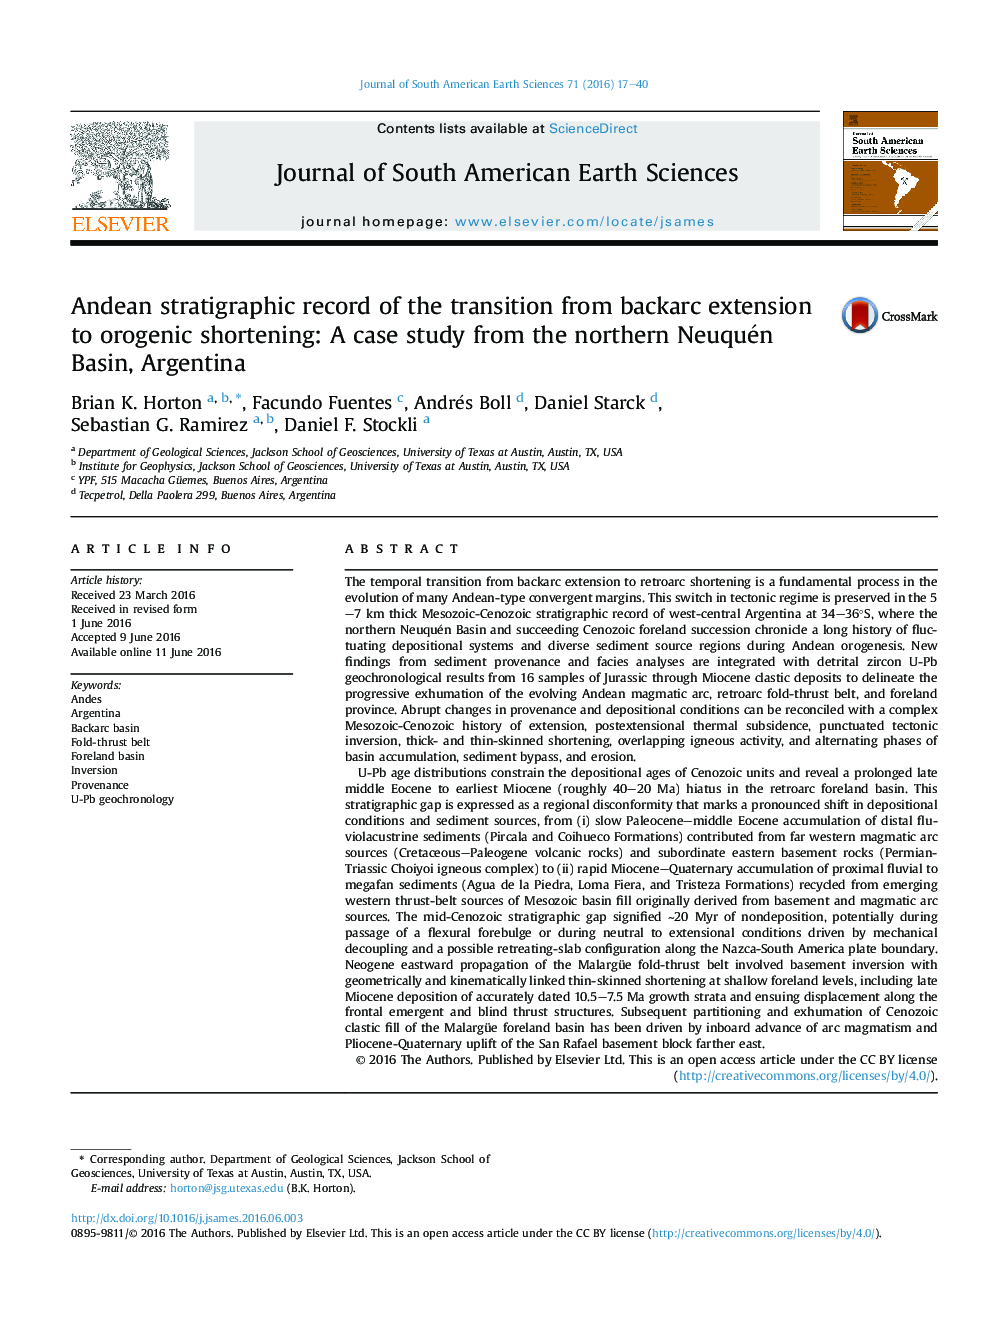 Andean stratigraphic record of the transition from backarc extension to orogenic shortening: A case study from the northern Neuquén Basin, Argentina